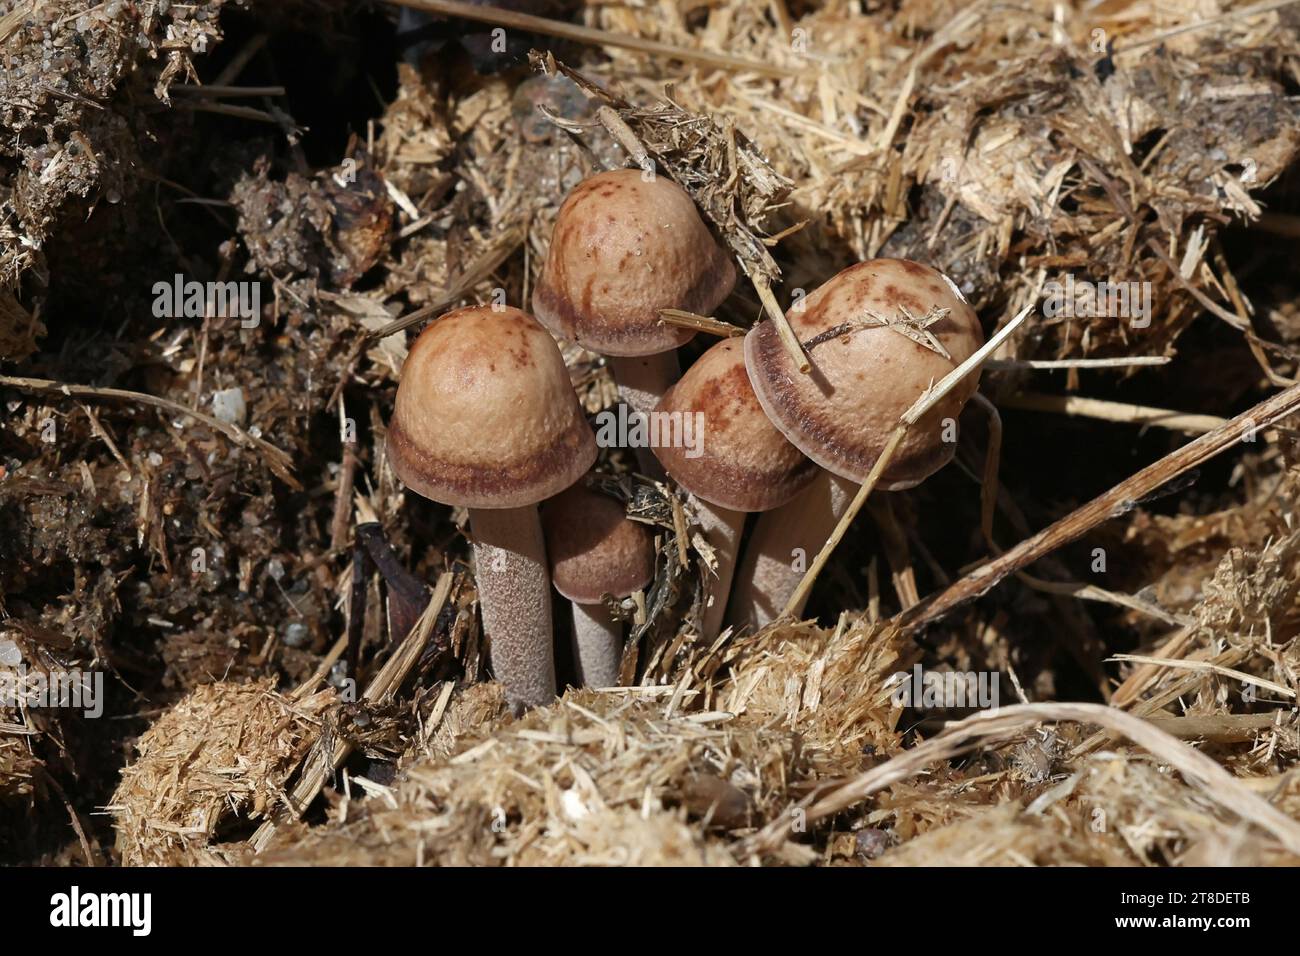 Panaeolus cinctulus, commonly known as the banded mottlegill, weed Panaeolus or subbs, psilocybin mushroom growing on horse dung in Finland Stock Photo